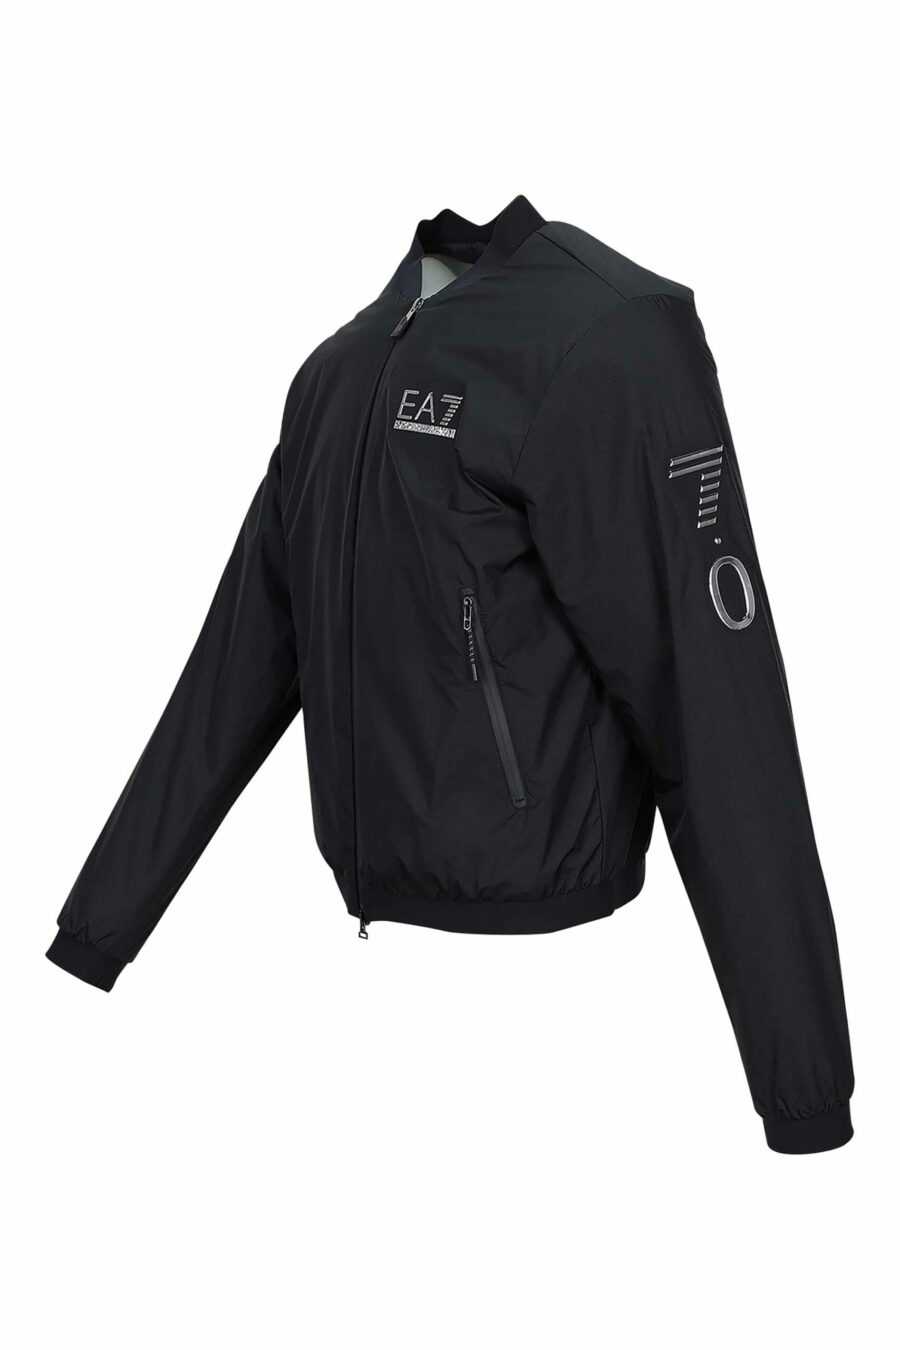 Black jacket with "lux identity" minilogue and side logo - 8056787938434 1 scaled